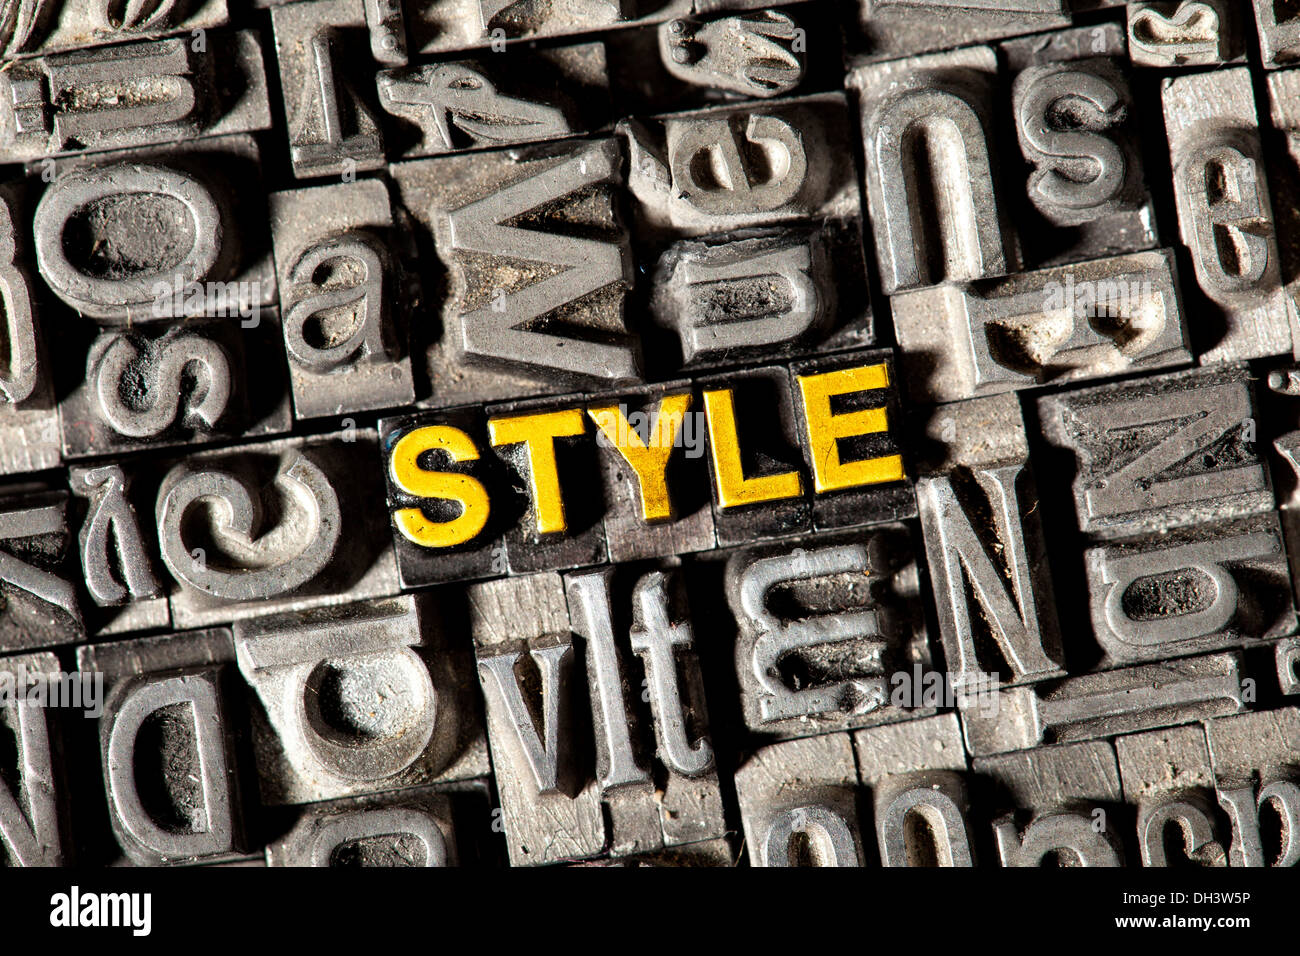 Old lead letters forming the word 'STYLE' Stock Photo